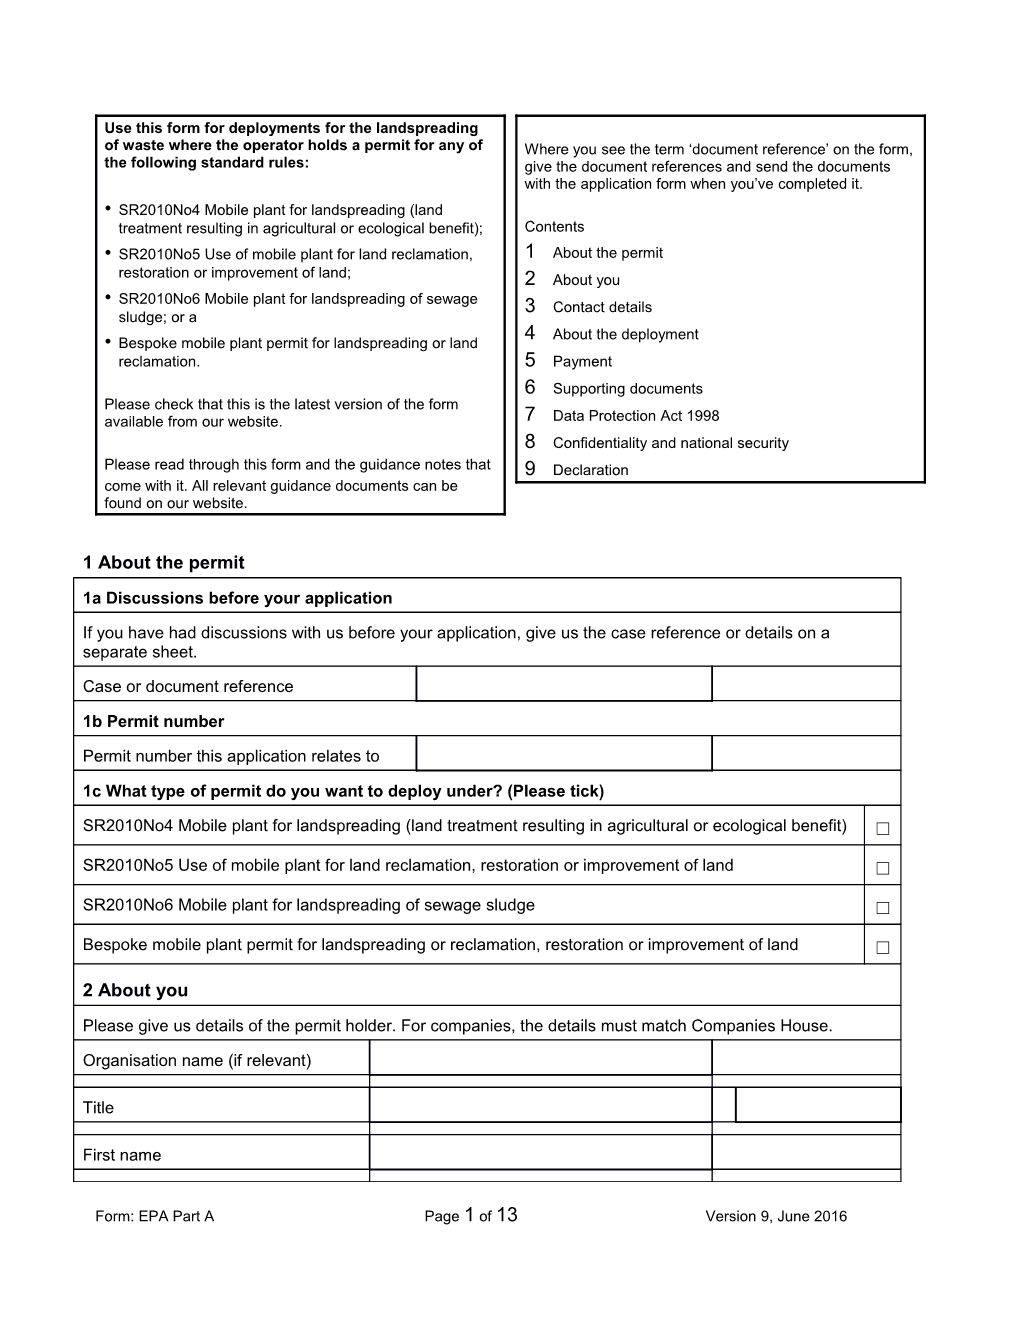 Use This Form for Deployments for the Landspreading of Waste Where the Operator Holds